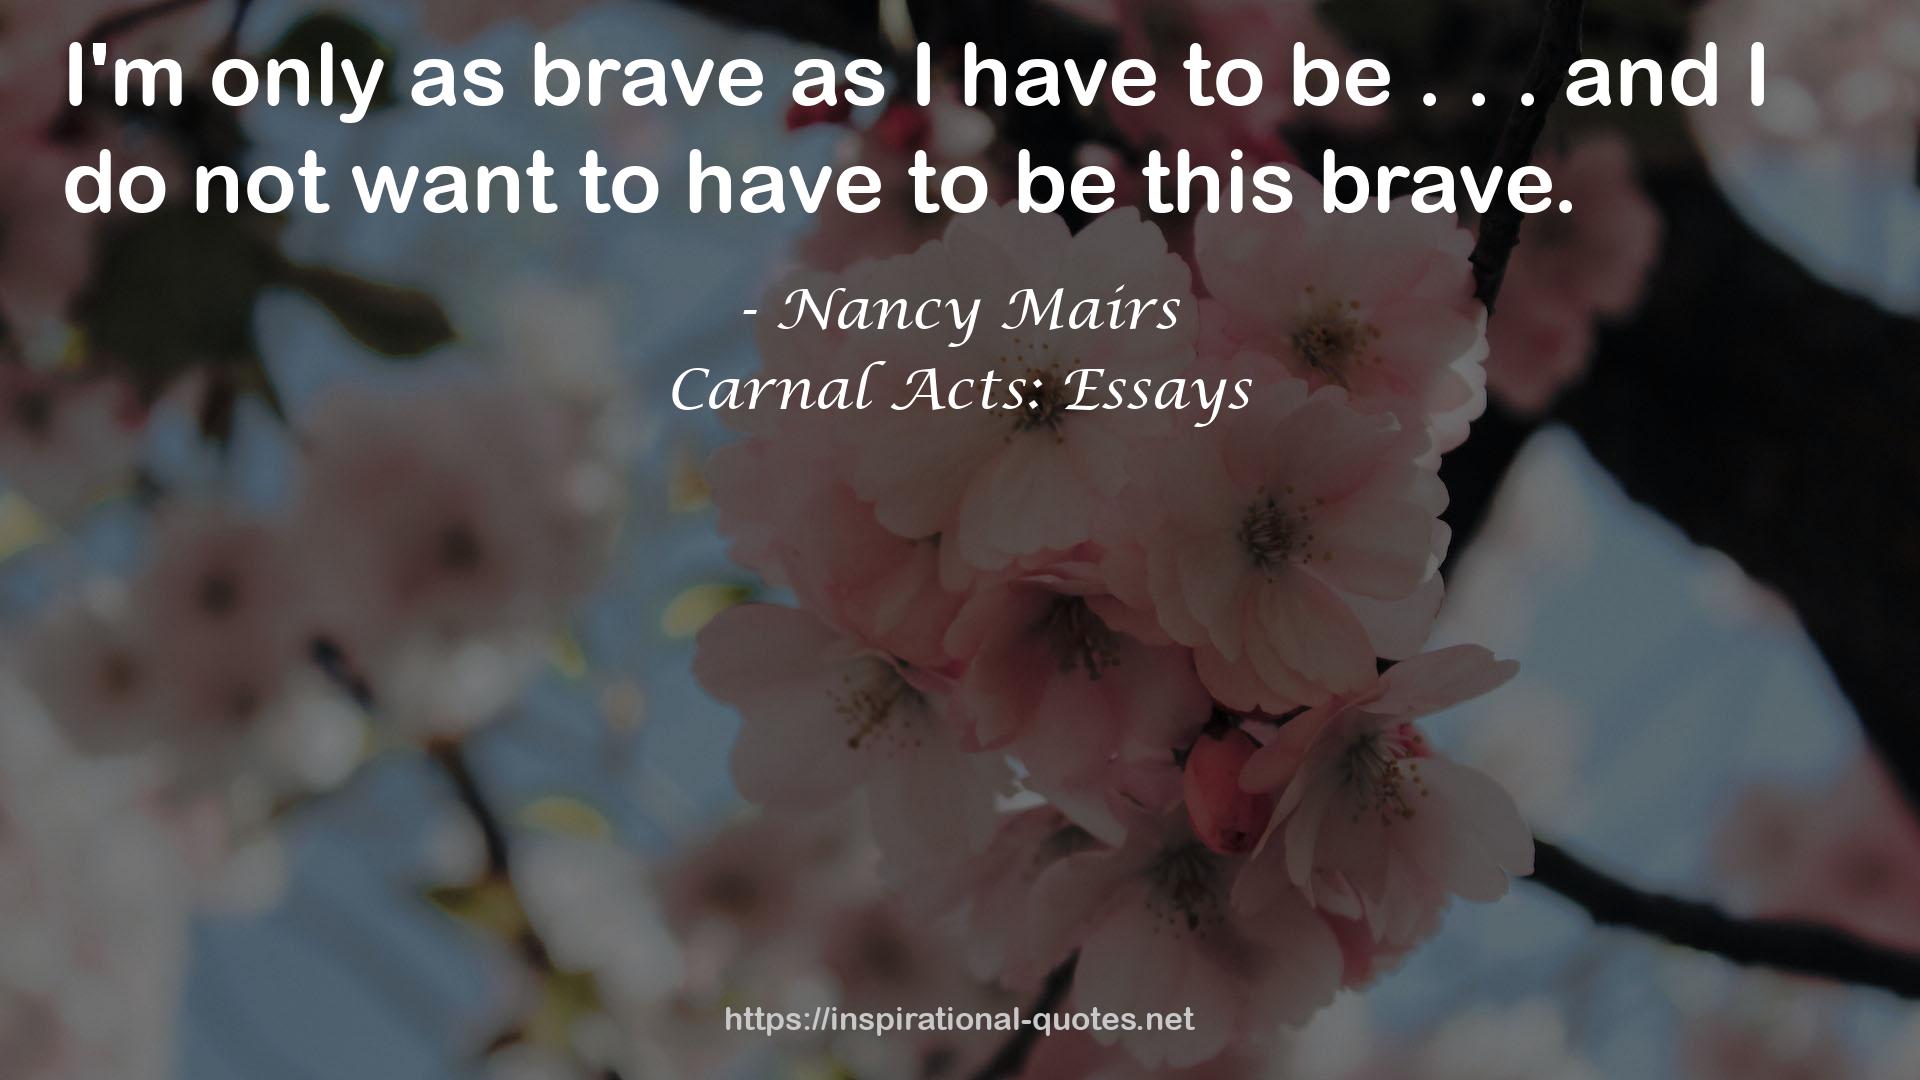 Carnal Acts: Essays QUOTES